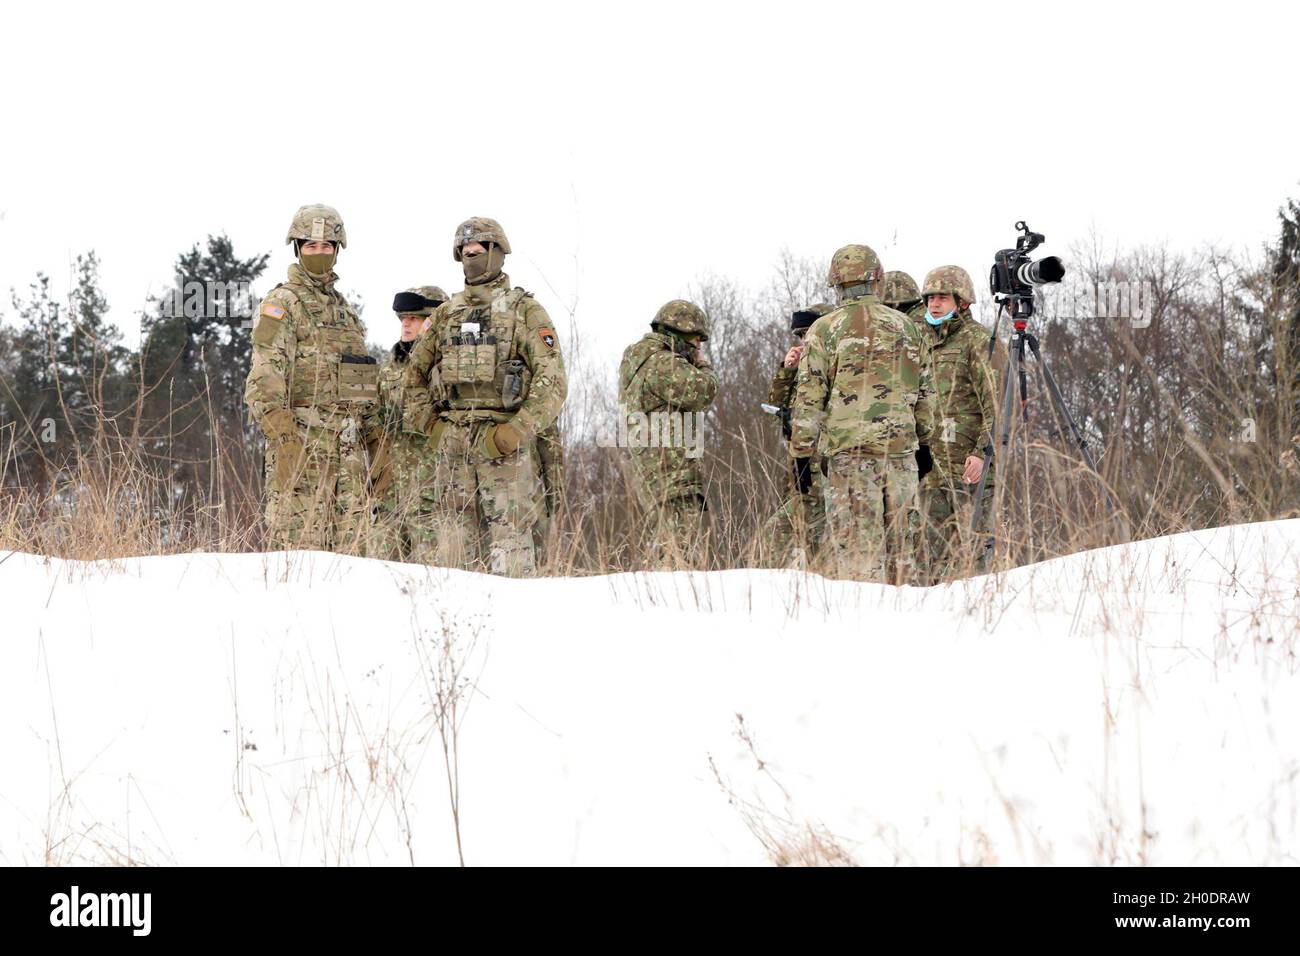 U.S. Army Soldiers from 1st Squadron, 2d Cavalry Regiment and Croatian Army Troops from 17th Contingent, Volcano Battery, enhanced Forward Presence Battle Group Poland stand on a range during a live fire event February 4, 2021, at Bemowo Piskie Training Area, Poland. Stock Photo